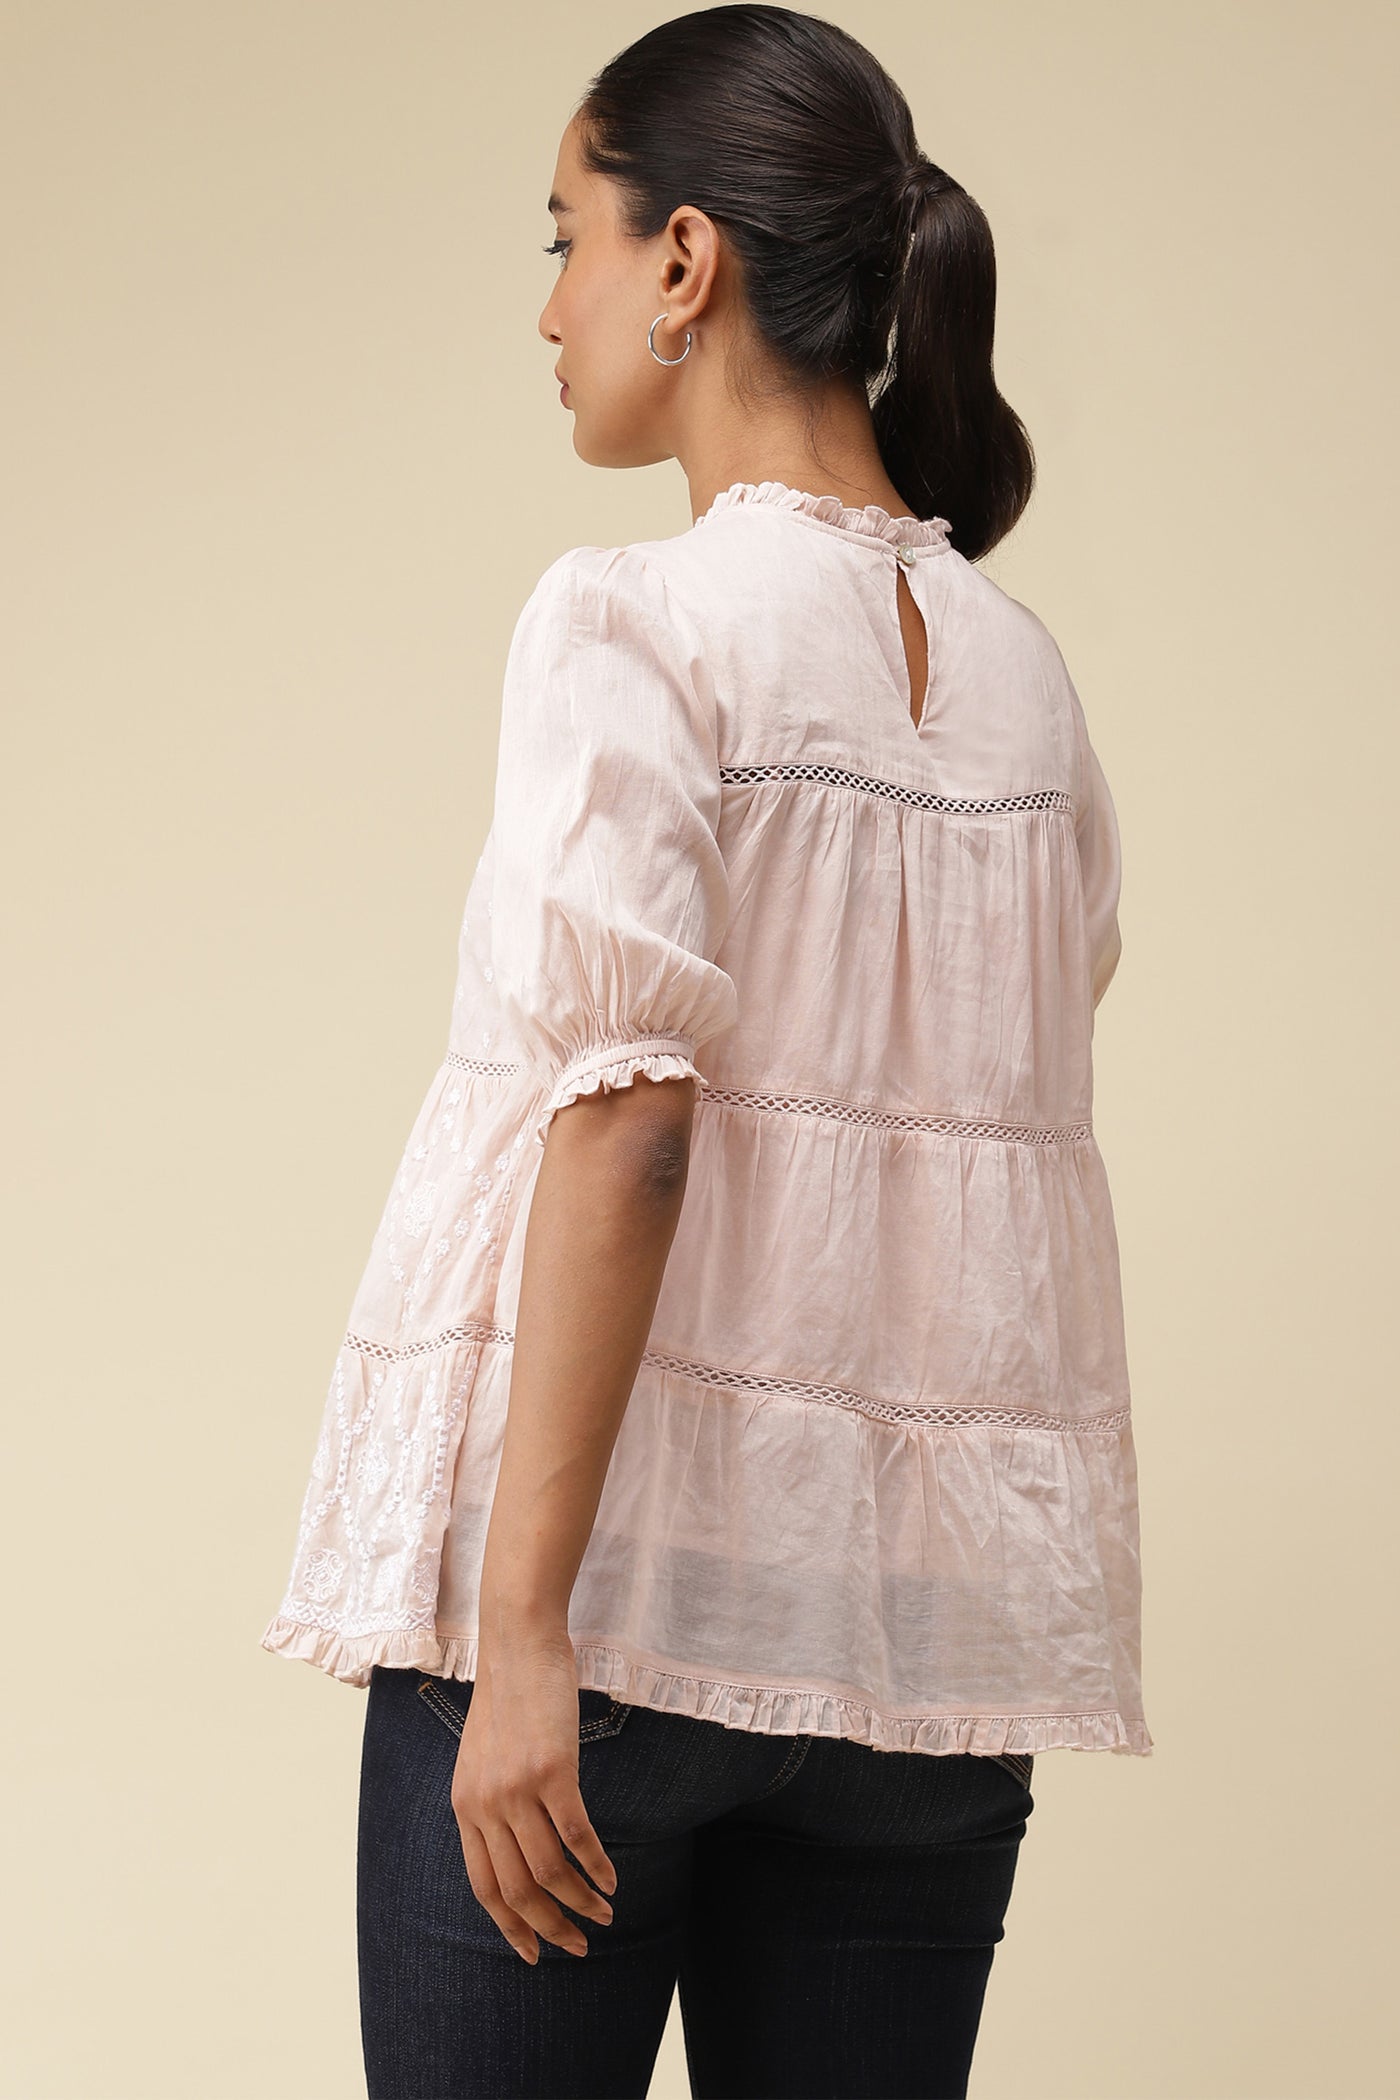 label ritu kumar Pink Embroidered Top With Lace Inserts western  designer wear online shopping melange singapore